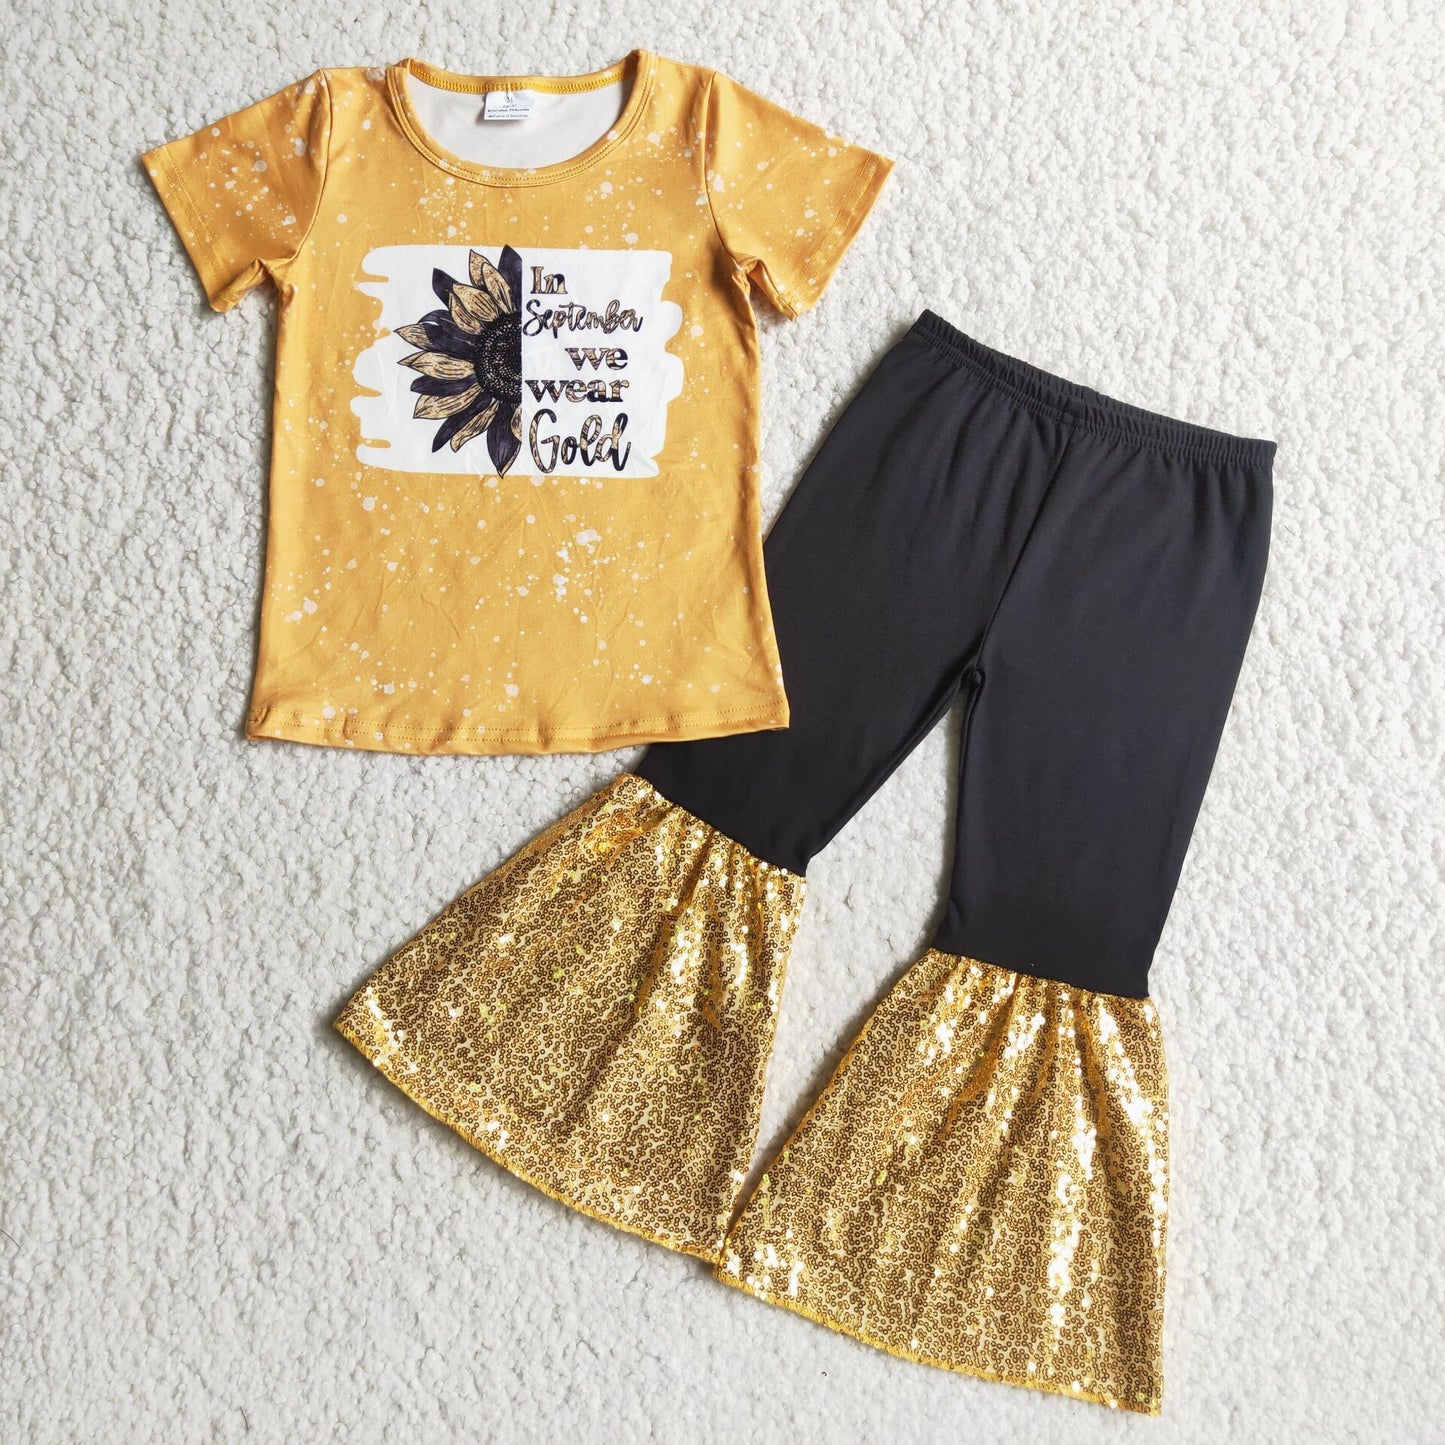 In September We Wear Gold Sequins Bottom Outfit